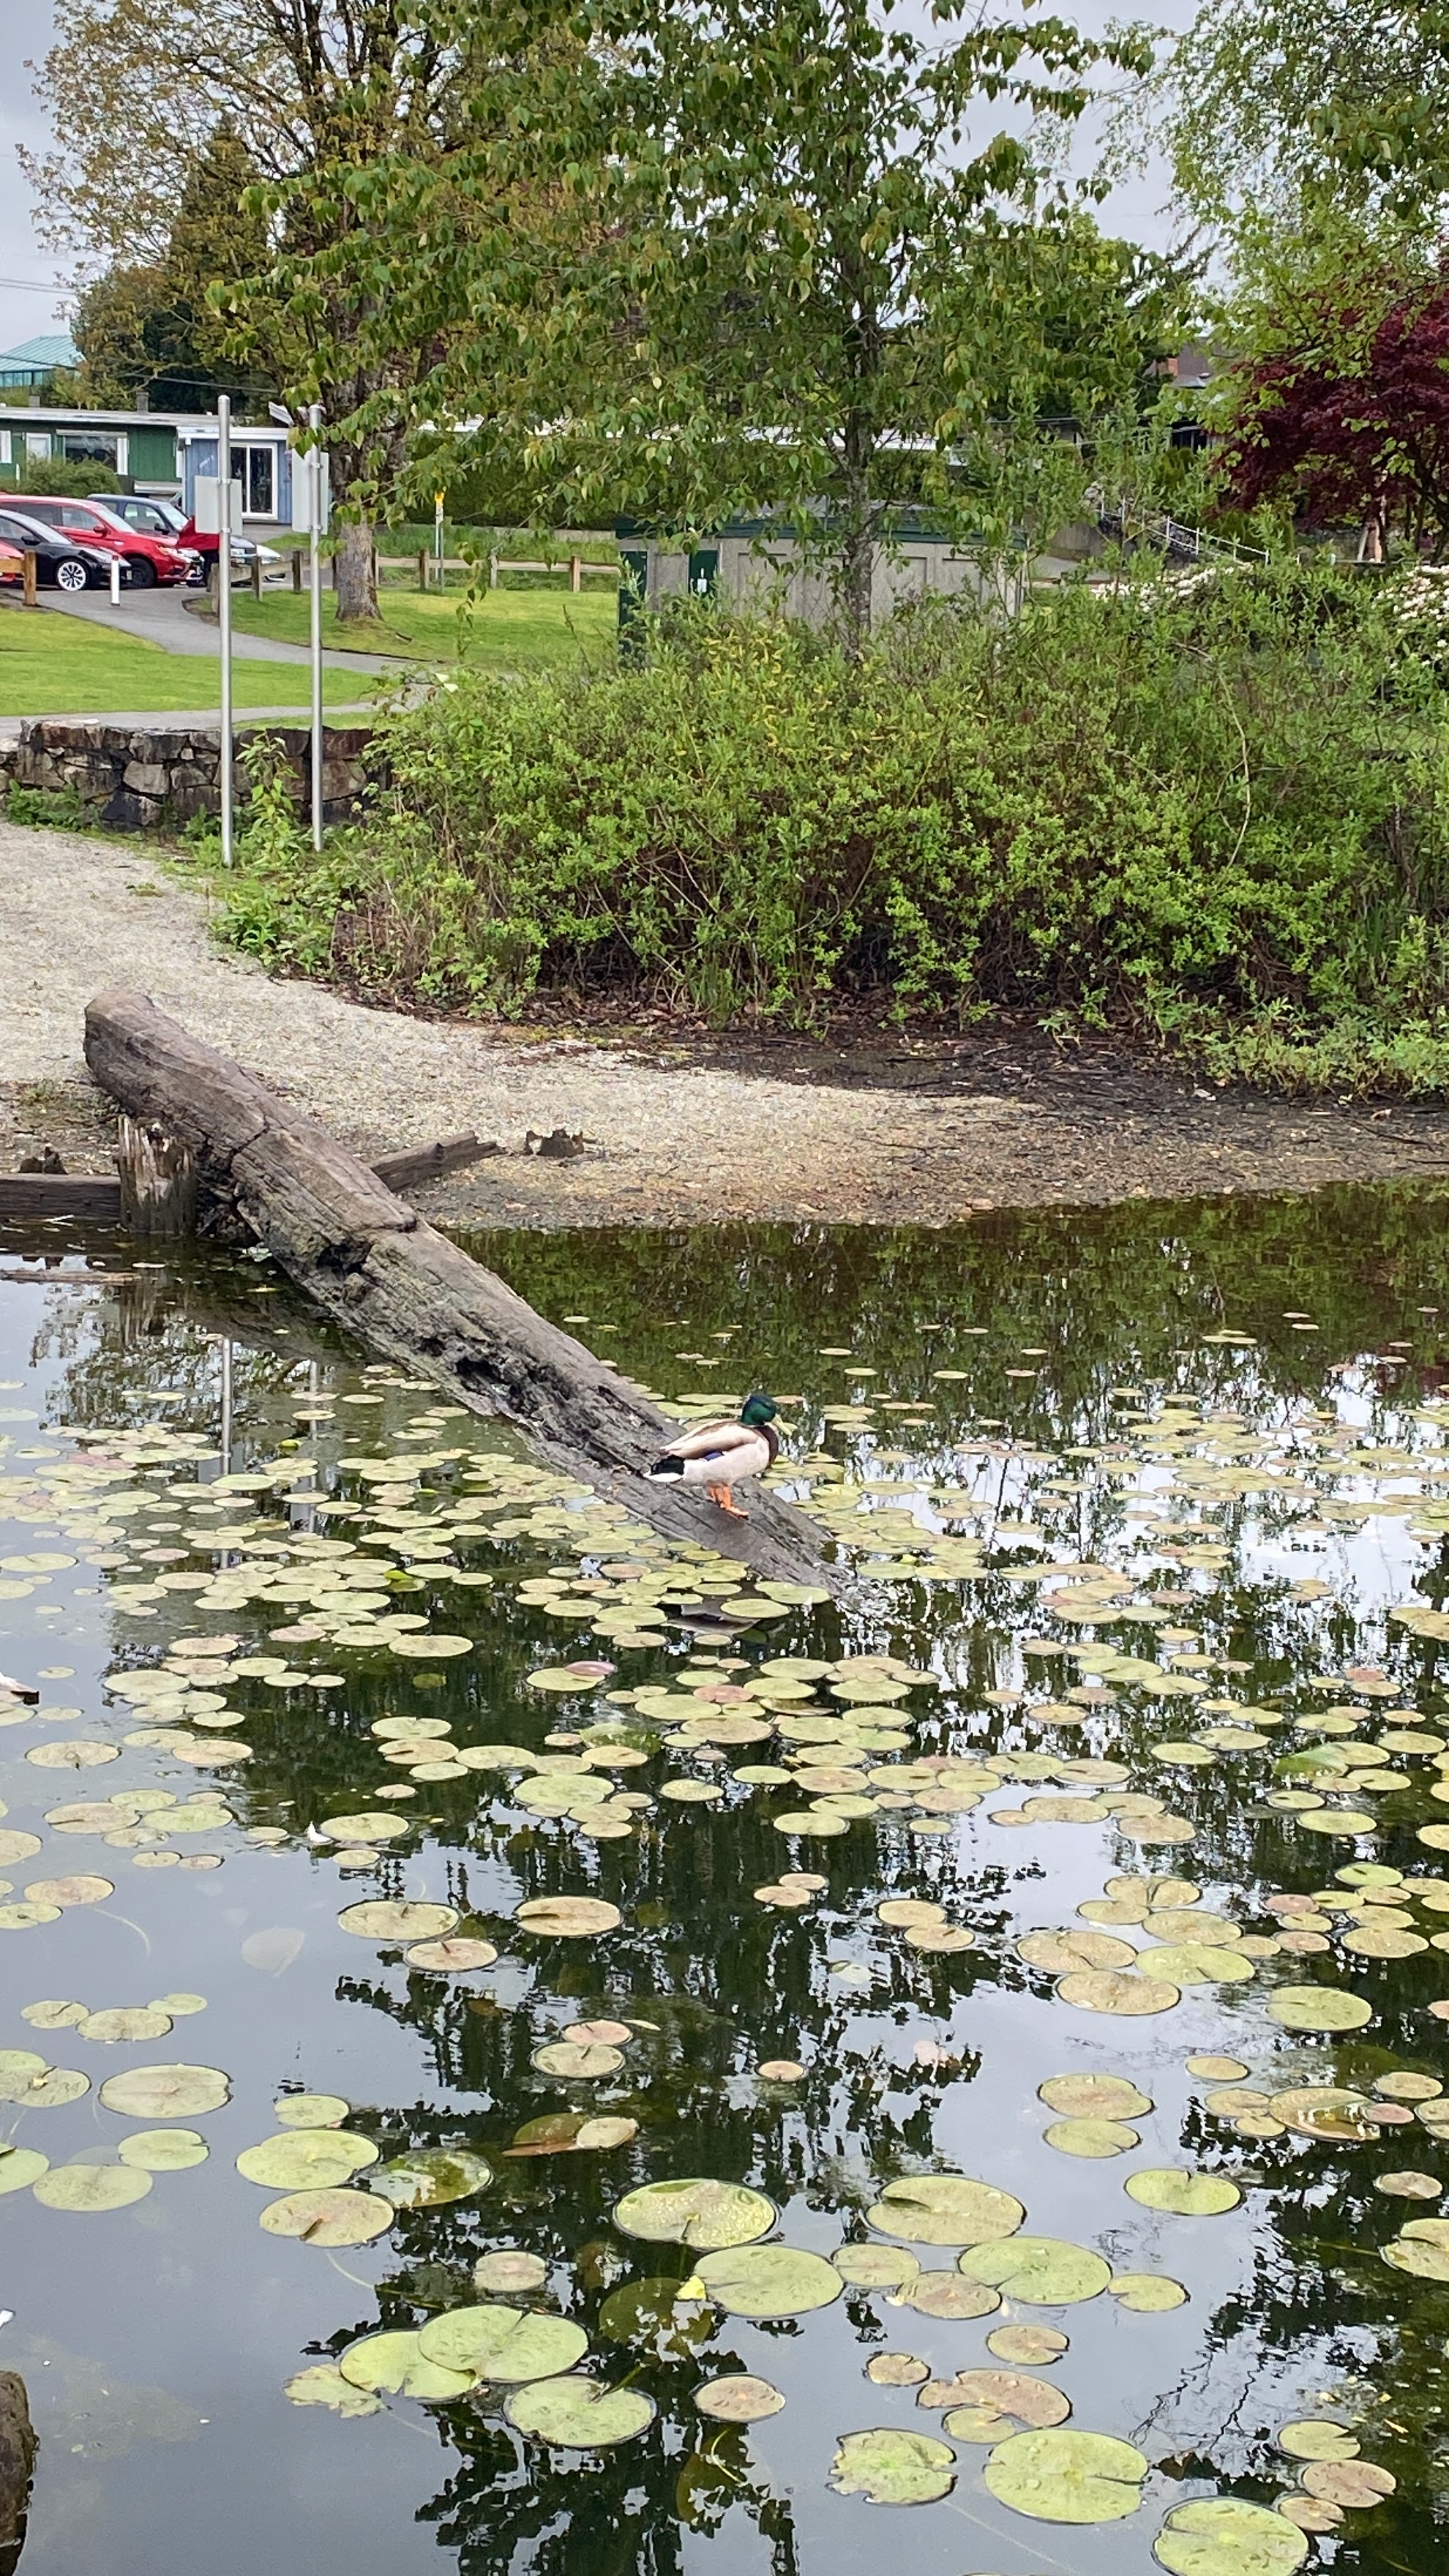 A lonely duck on top of the log